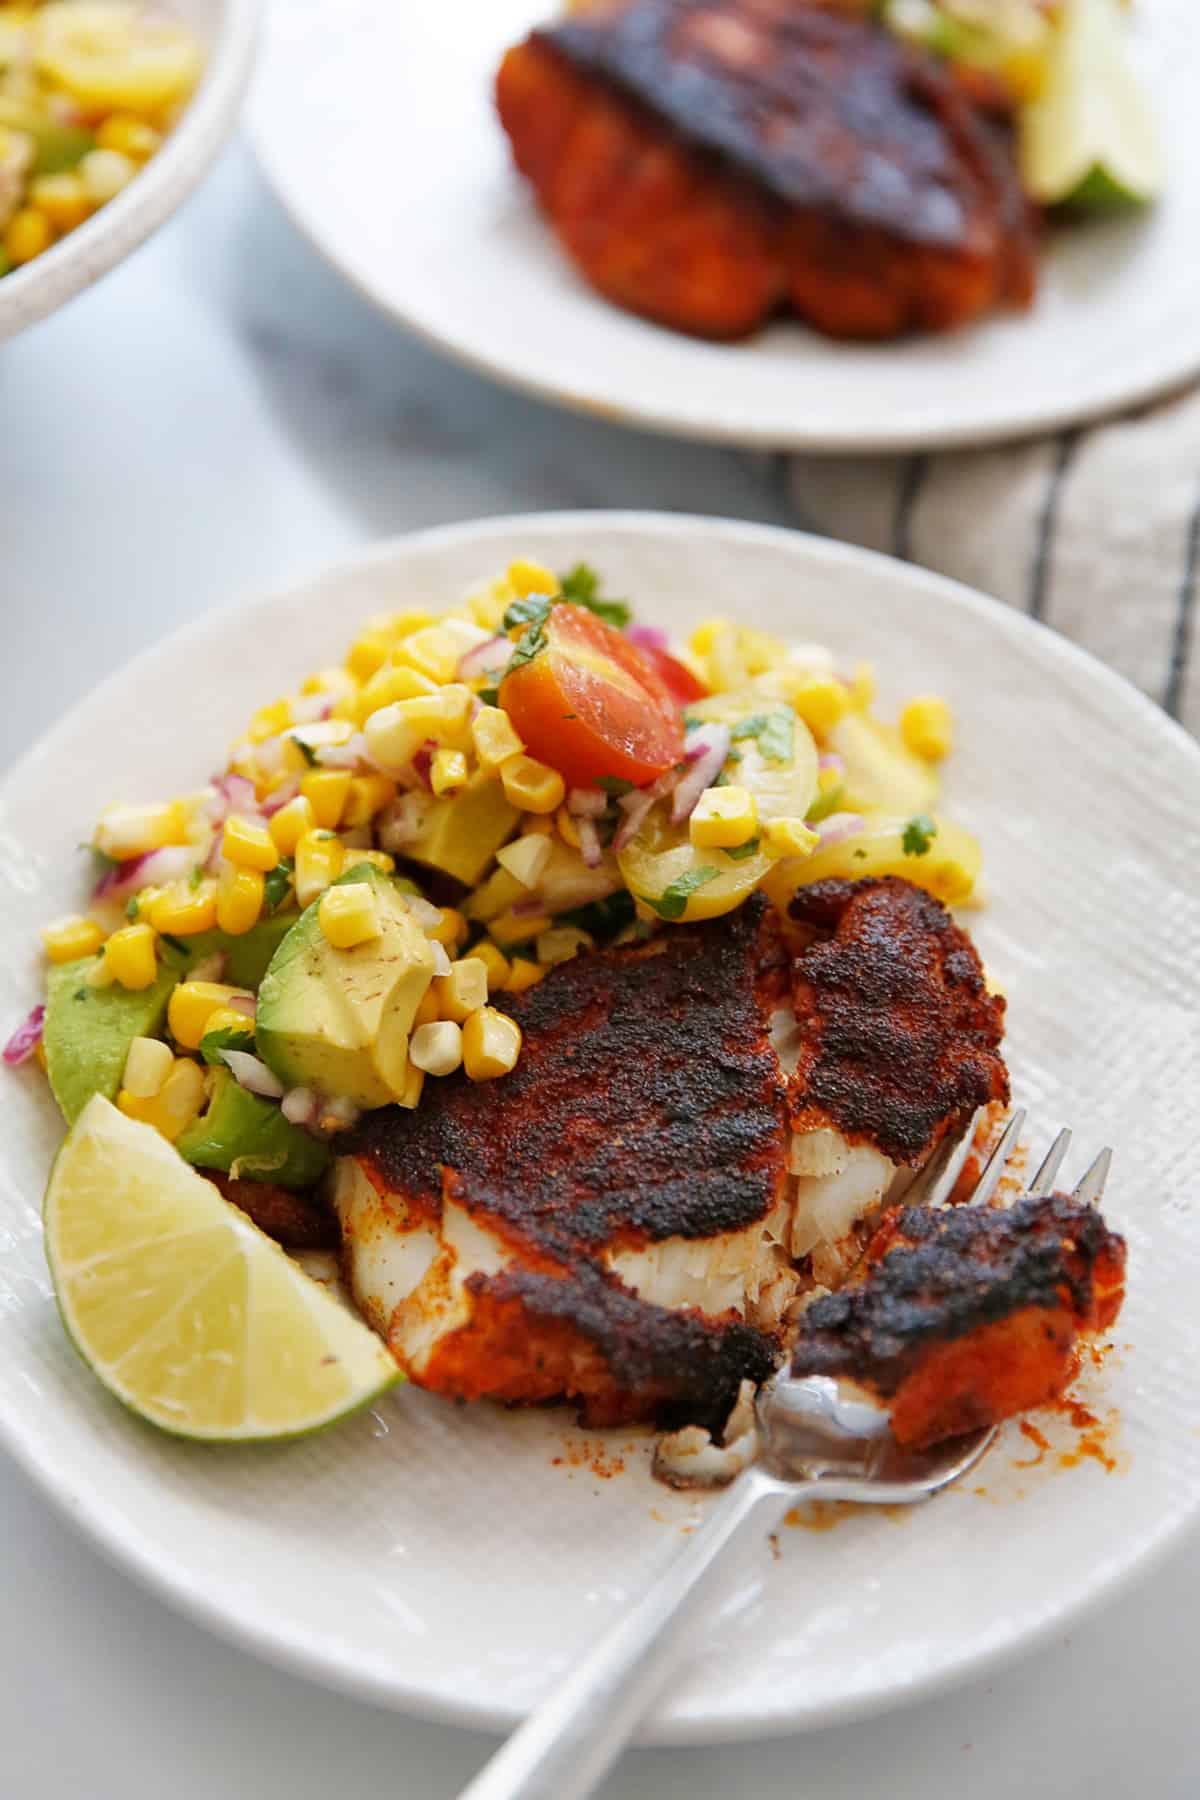 Corn salsa with avocado plated with fish